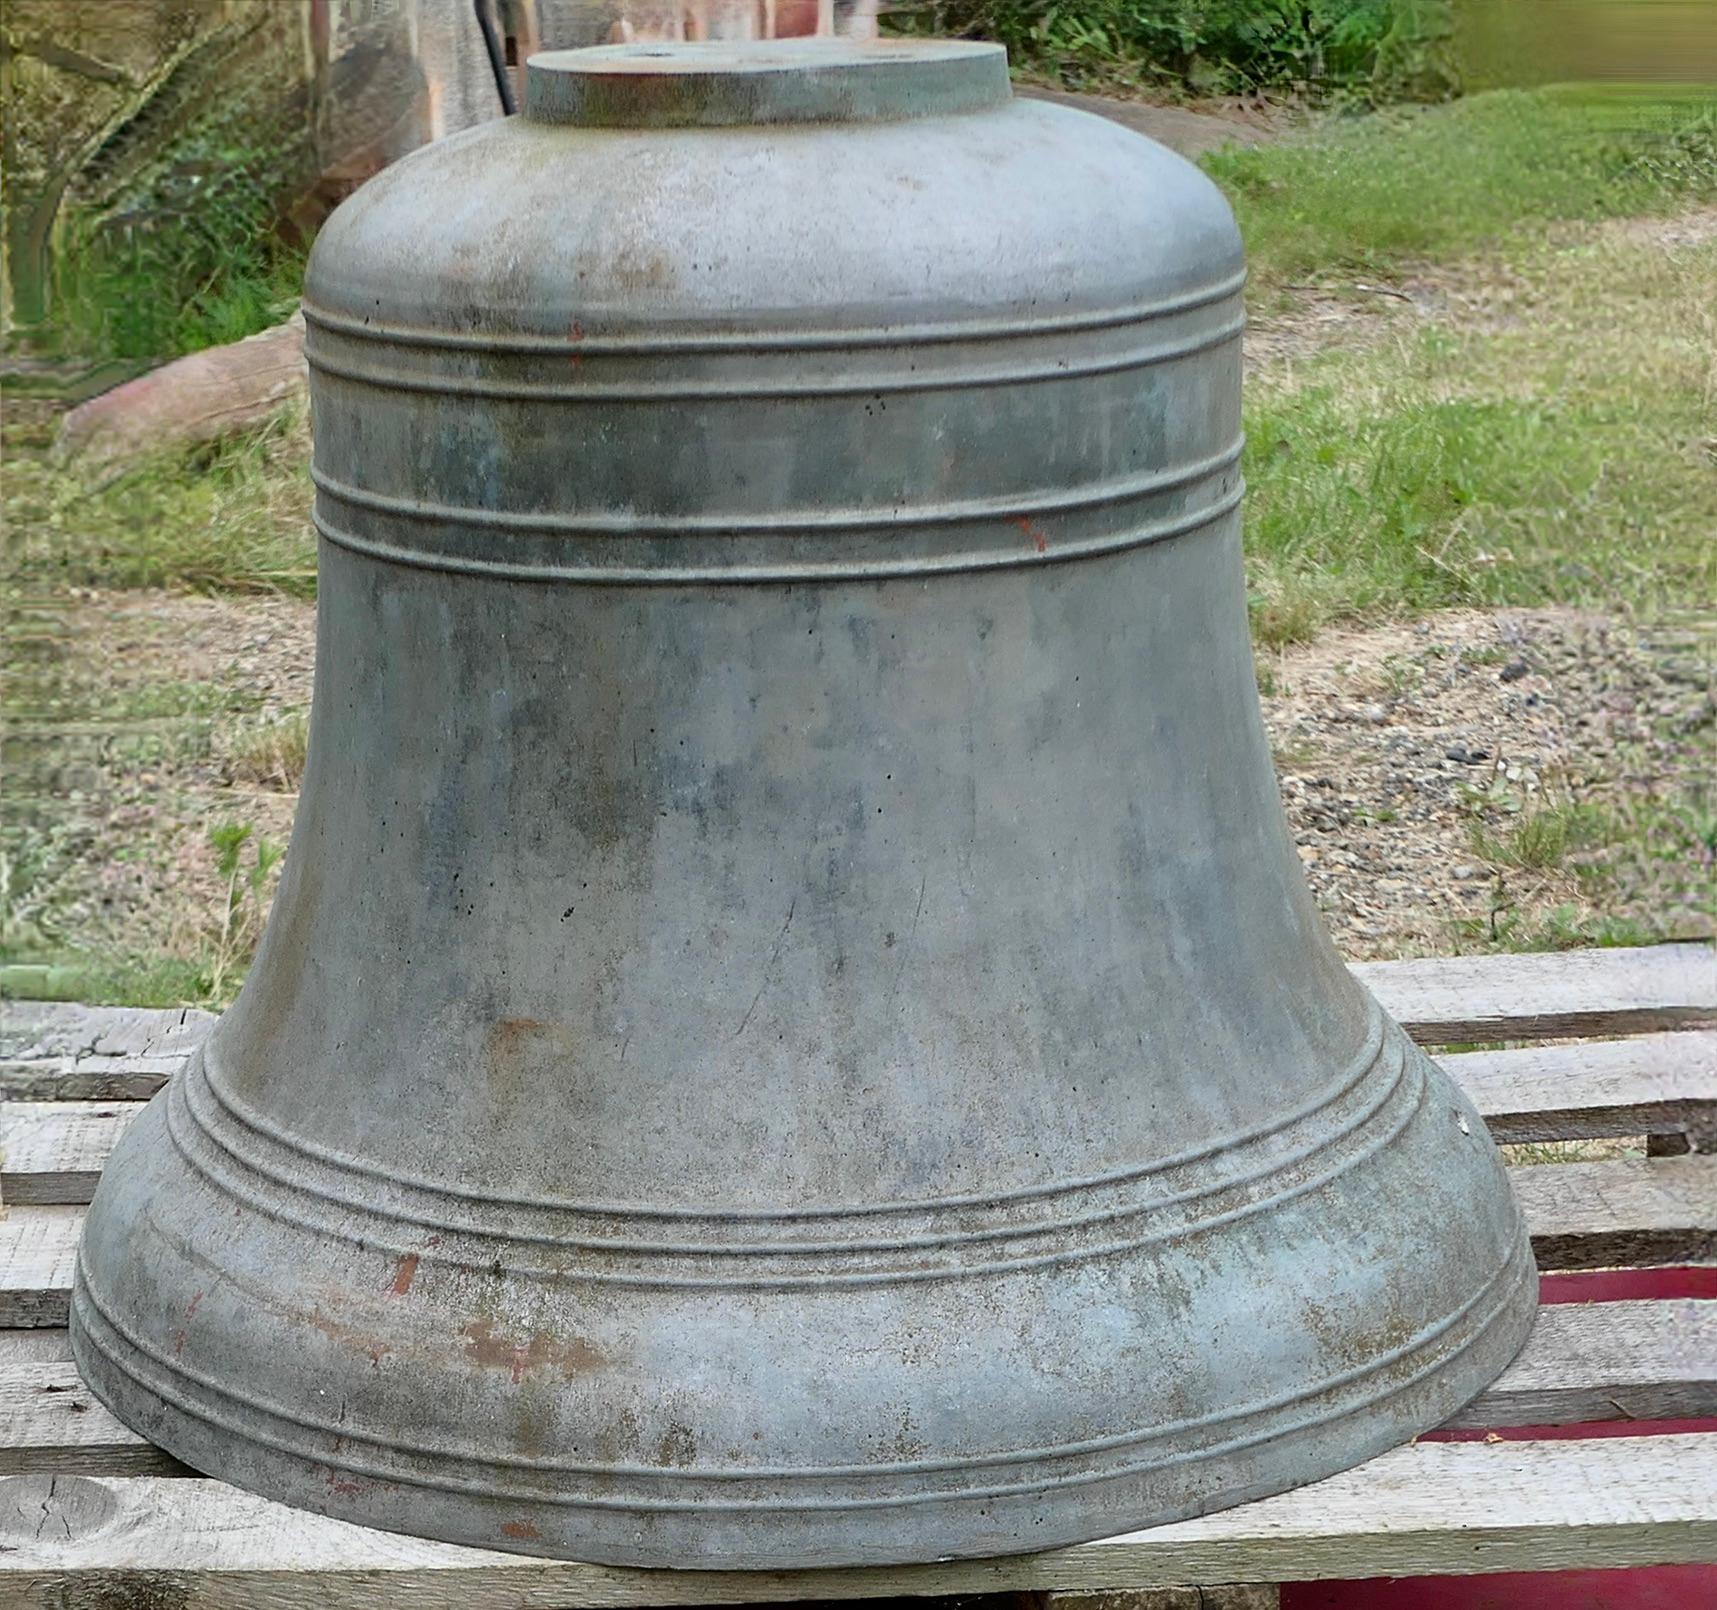 Very Large Bronze Bell from Synchronome made in 1948

Synchronome was established in 1895 by Frank Hope Jones, they started making electric clock systems for British industry in the late 19th century.

This is a super vey large bell, it has an